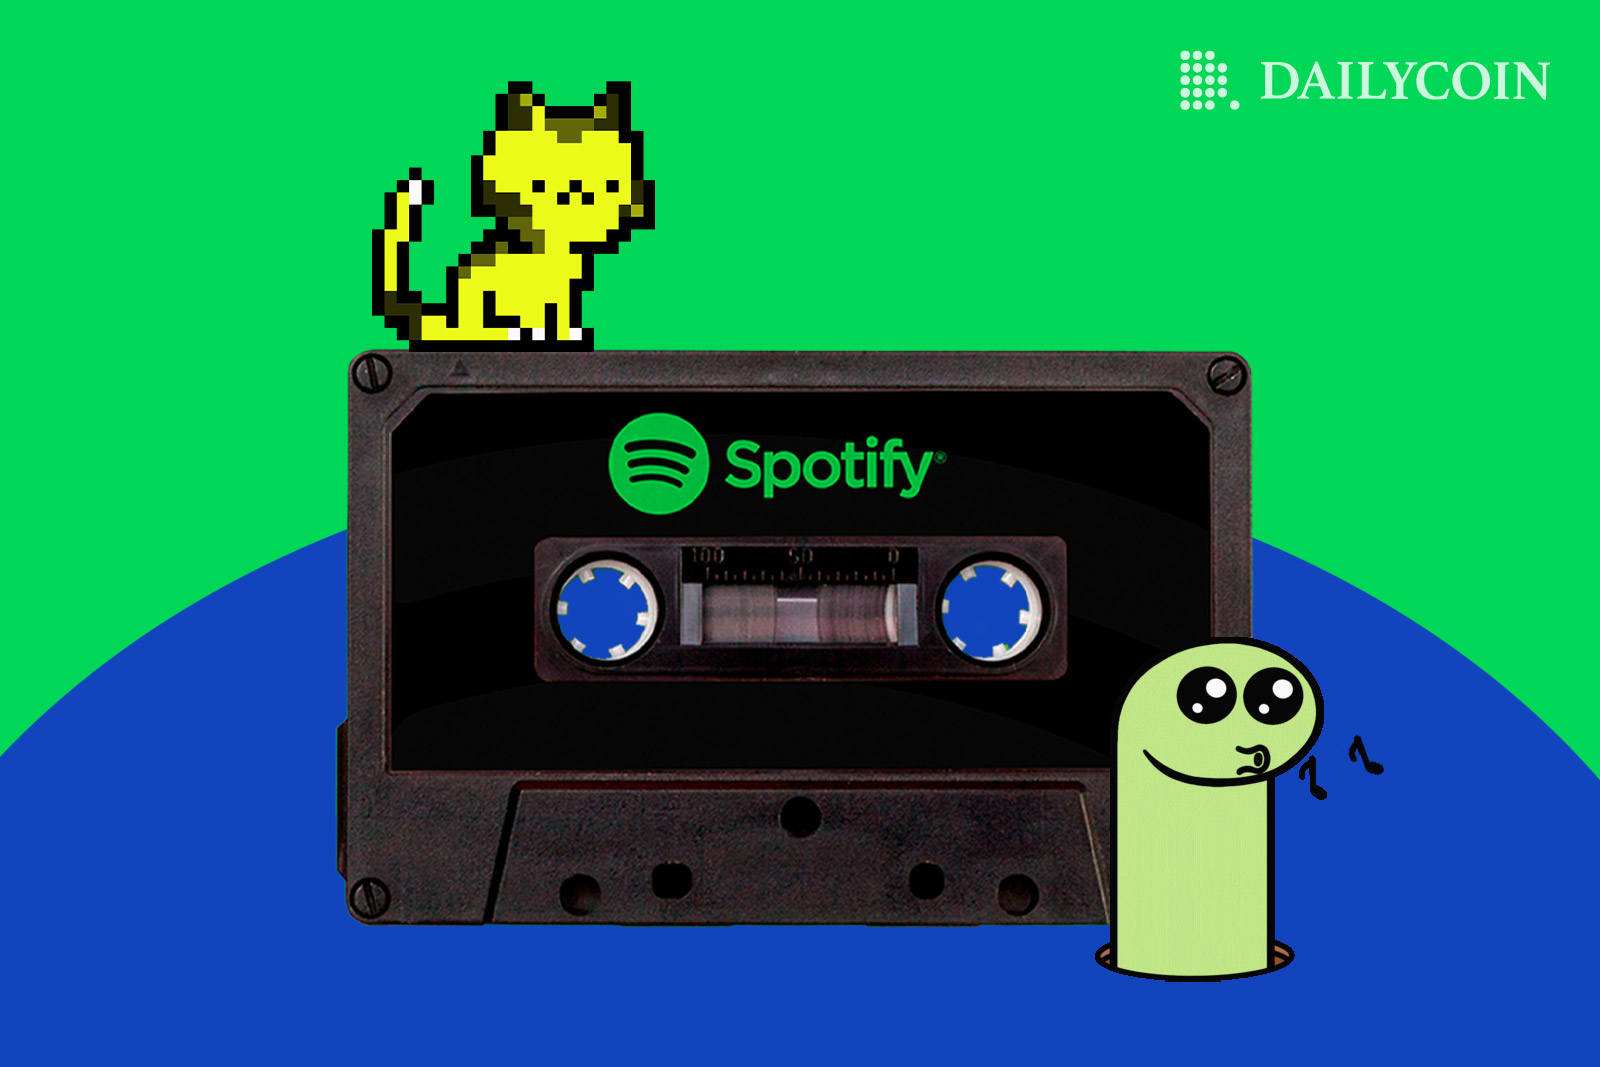 Spotify cassette with a pixelated cat on top of it, as an NFT worm is whistling notes nearby.